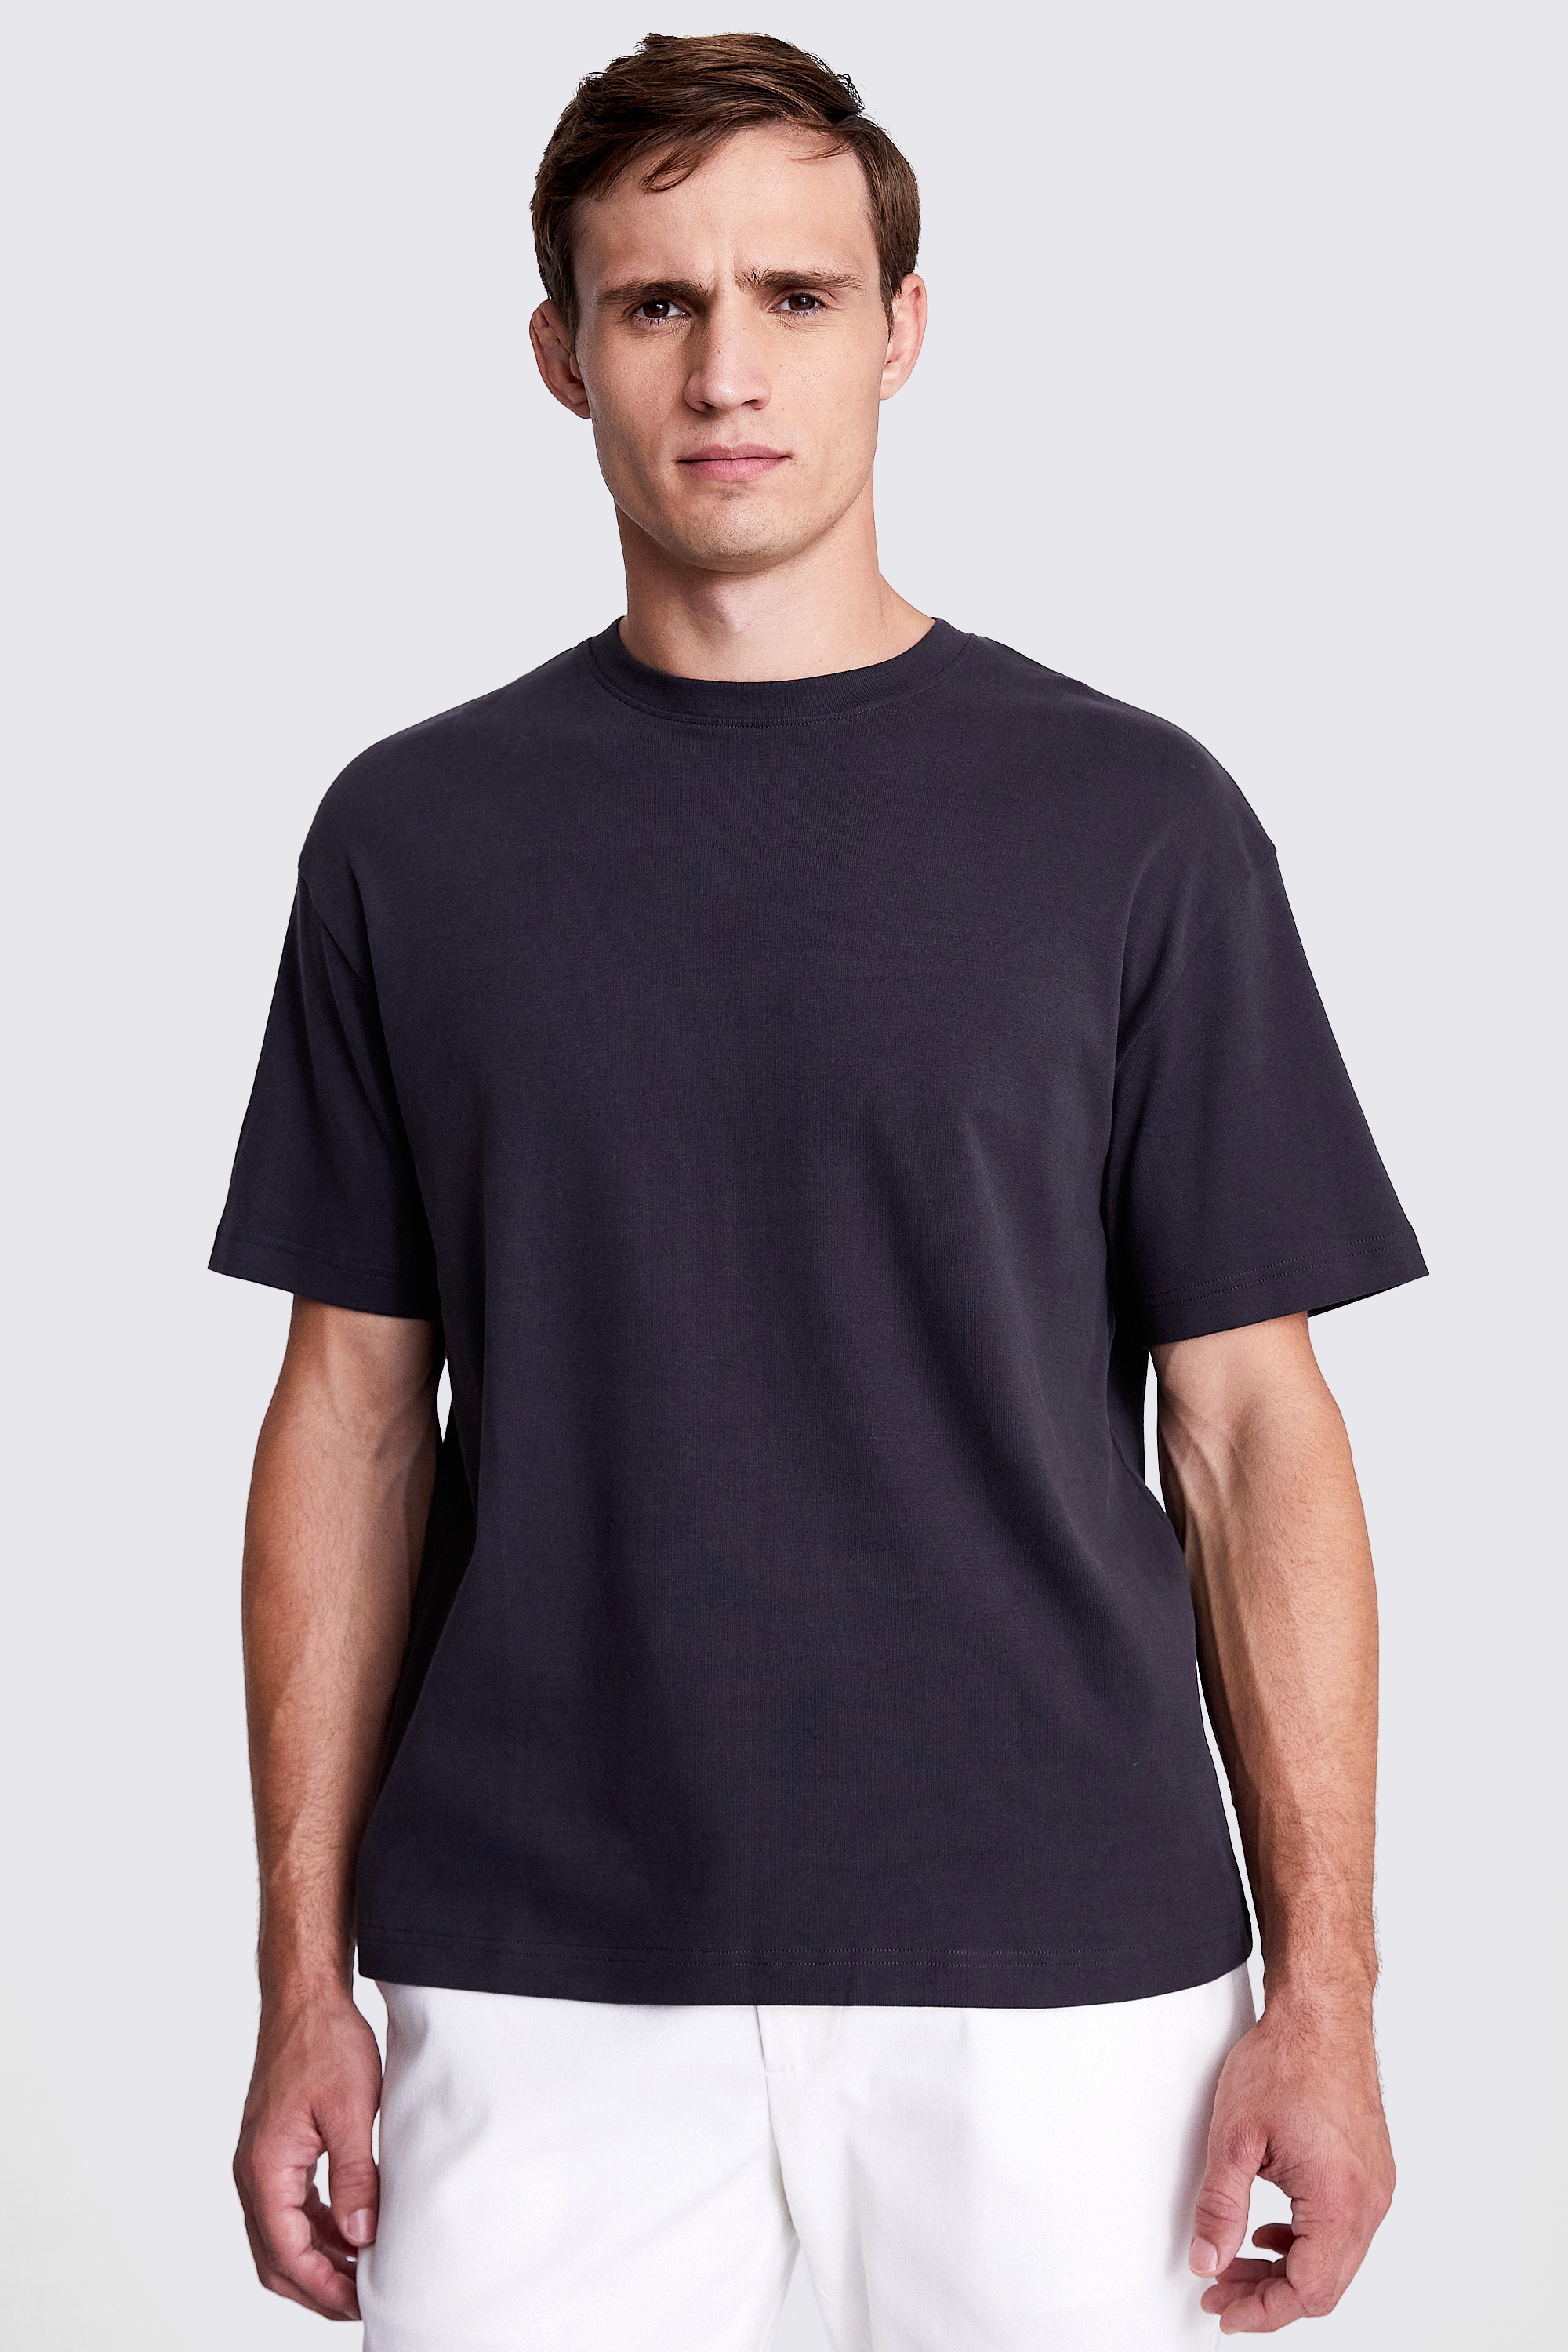 Charcoal Heavy Weight Crew-Neck T-Shirt | Buy Online at Moss